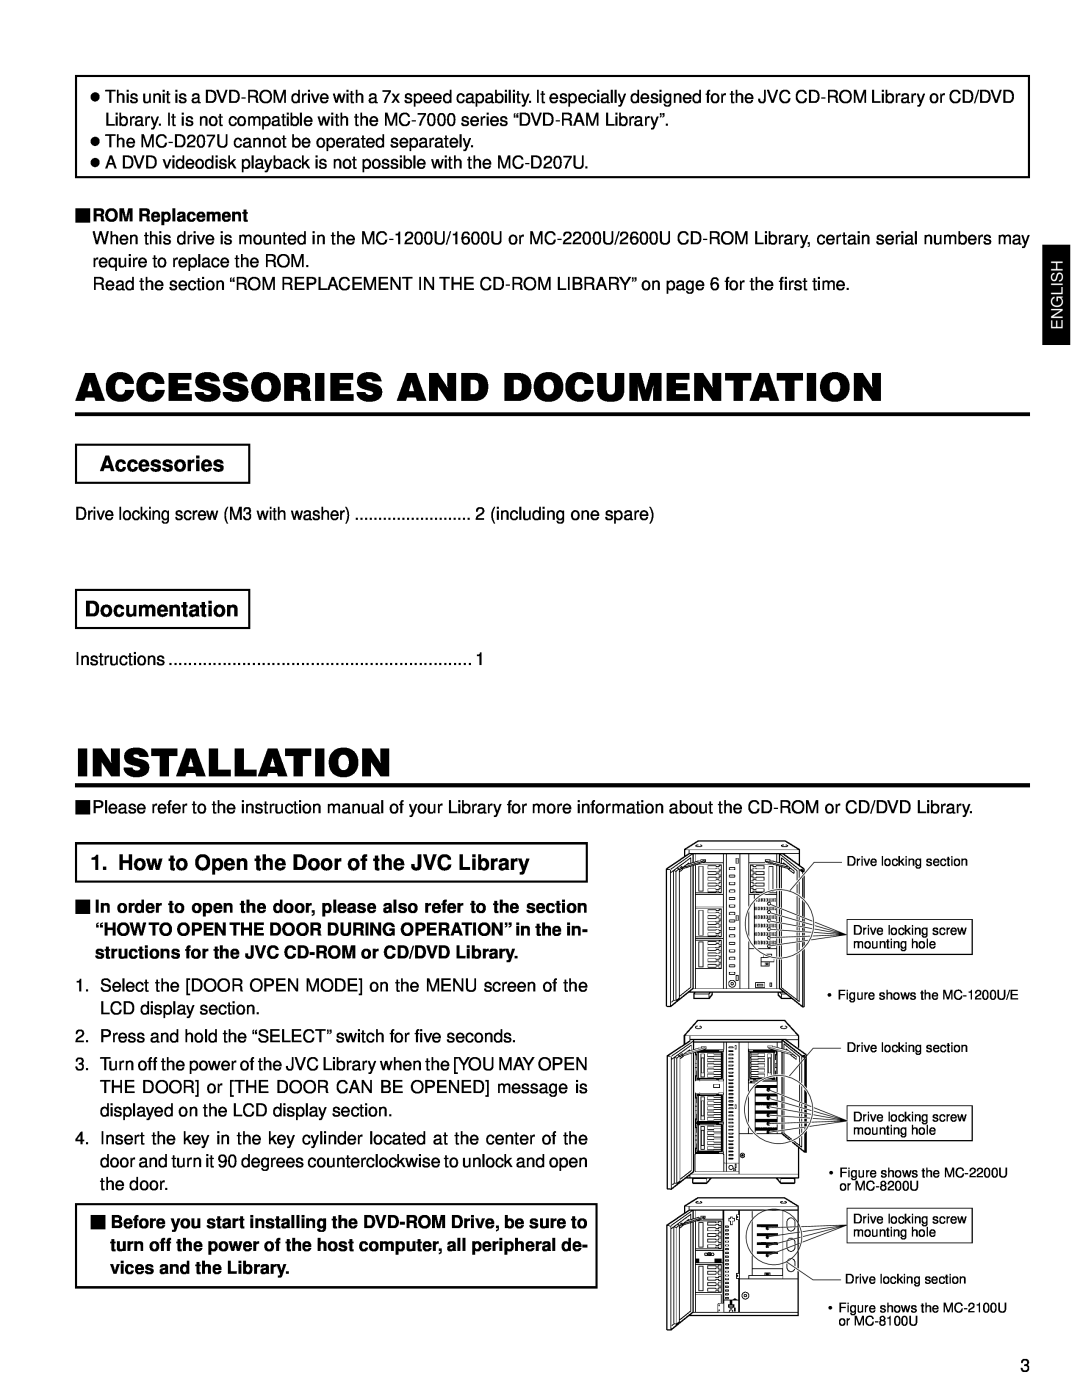 JVC MC-D207U instruction manual Accessories And Documentation, Installation, How to Open the Door of the JVC Library 